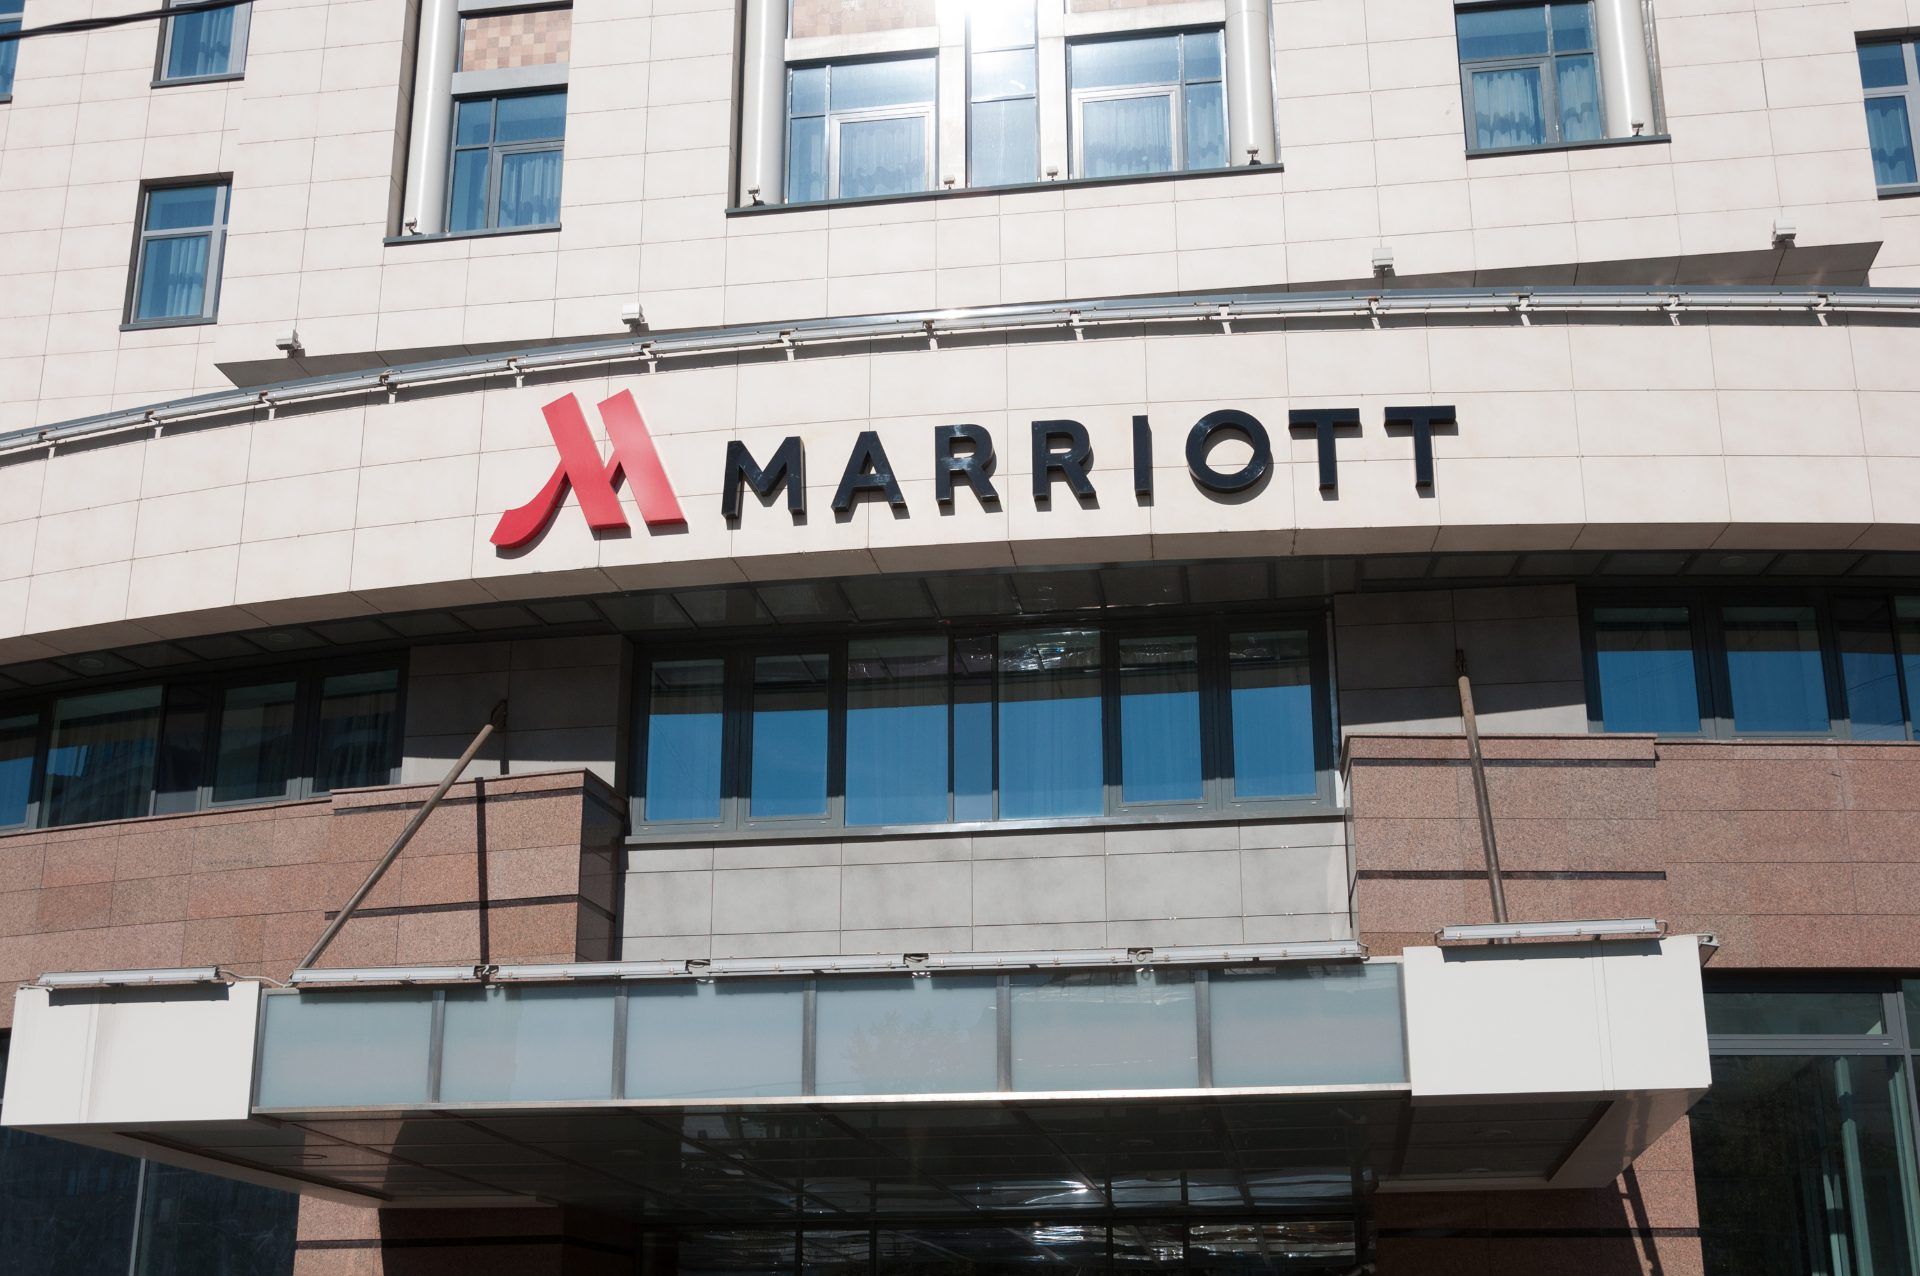 Marriott sign on the front of a hotel - Marriott data breach